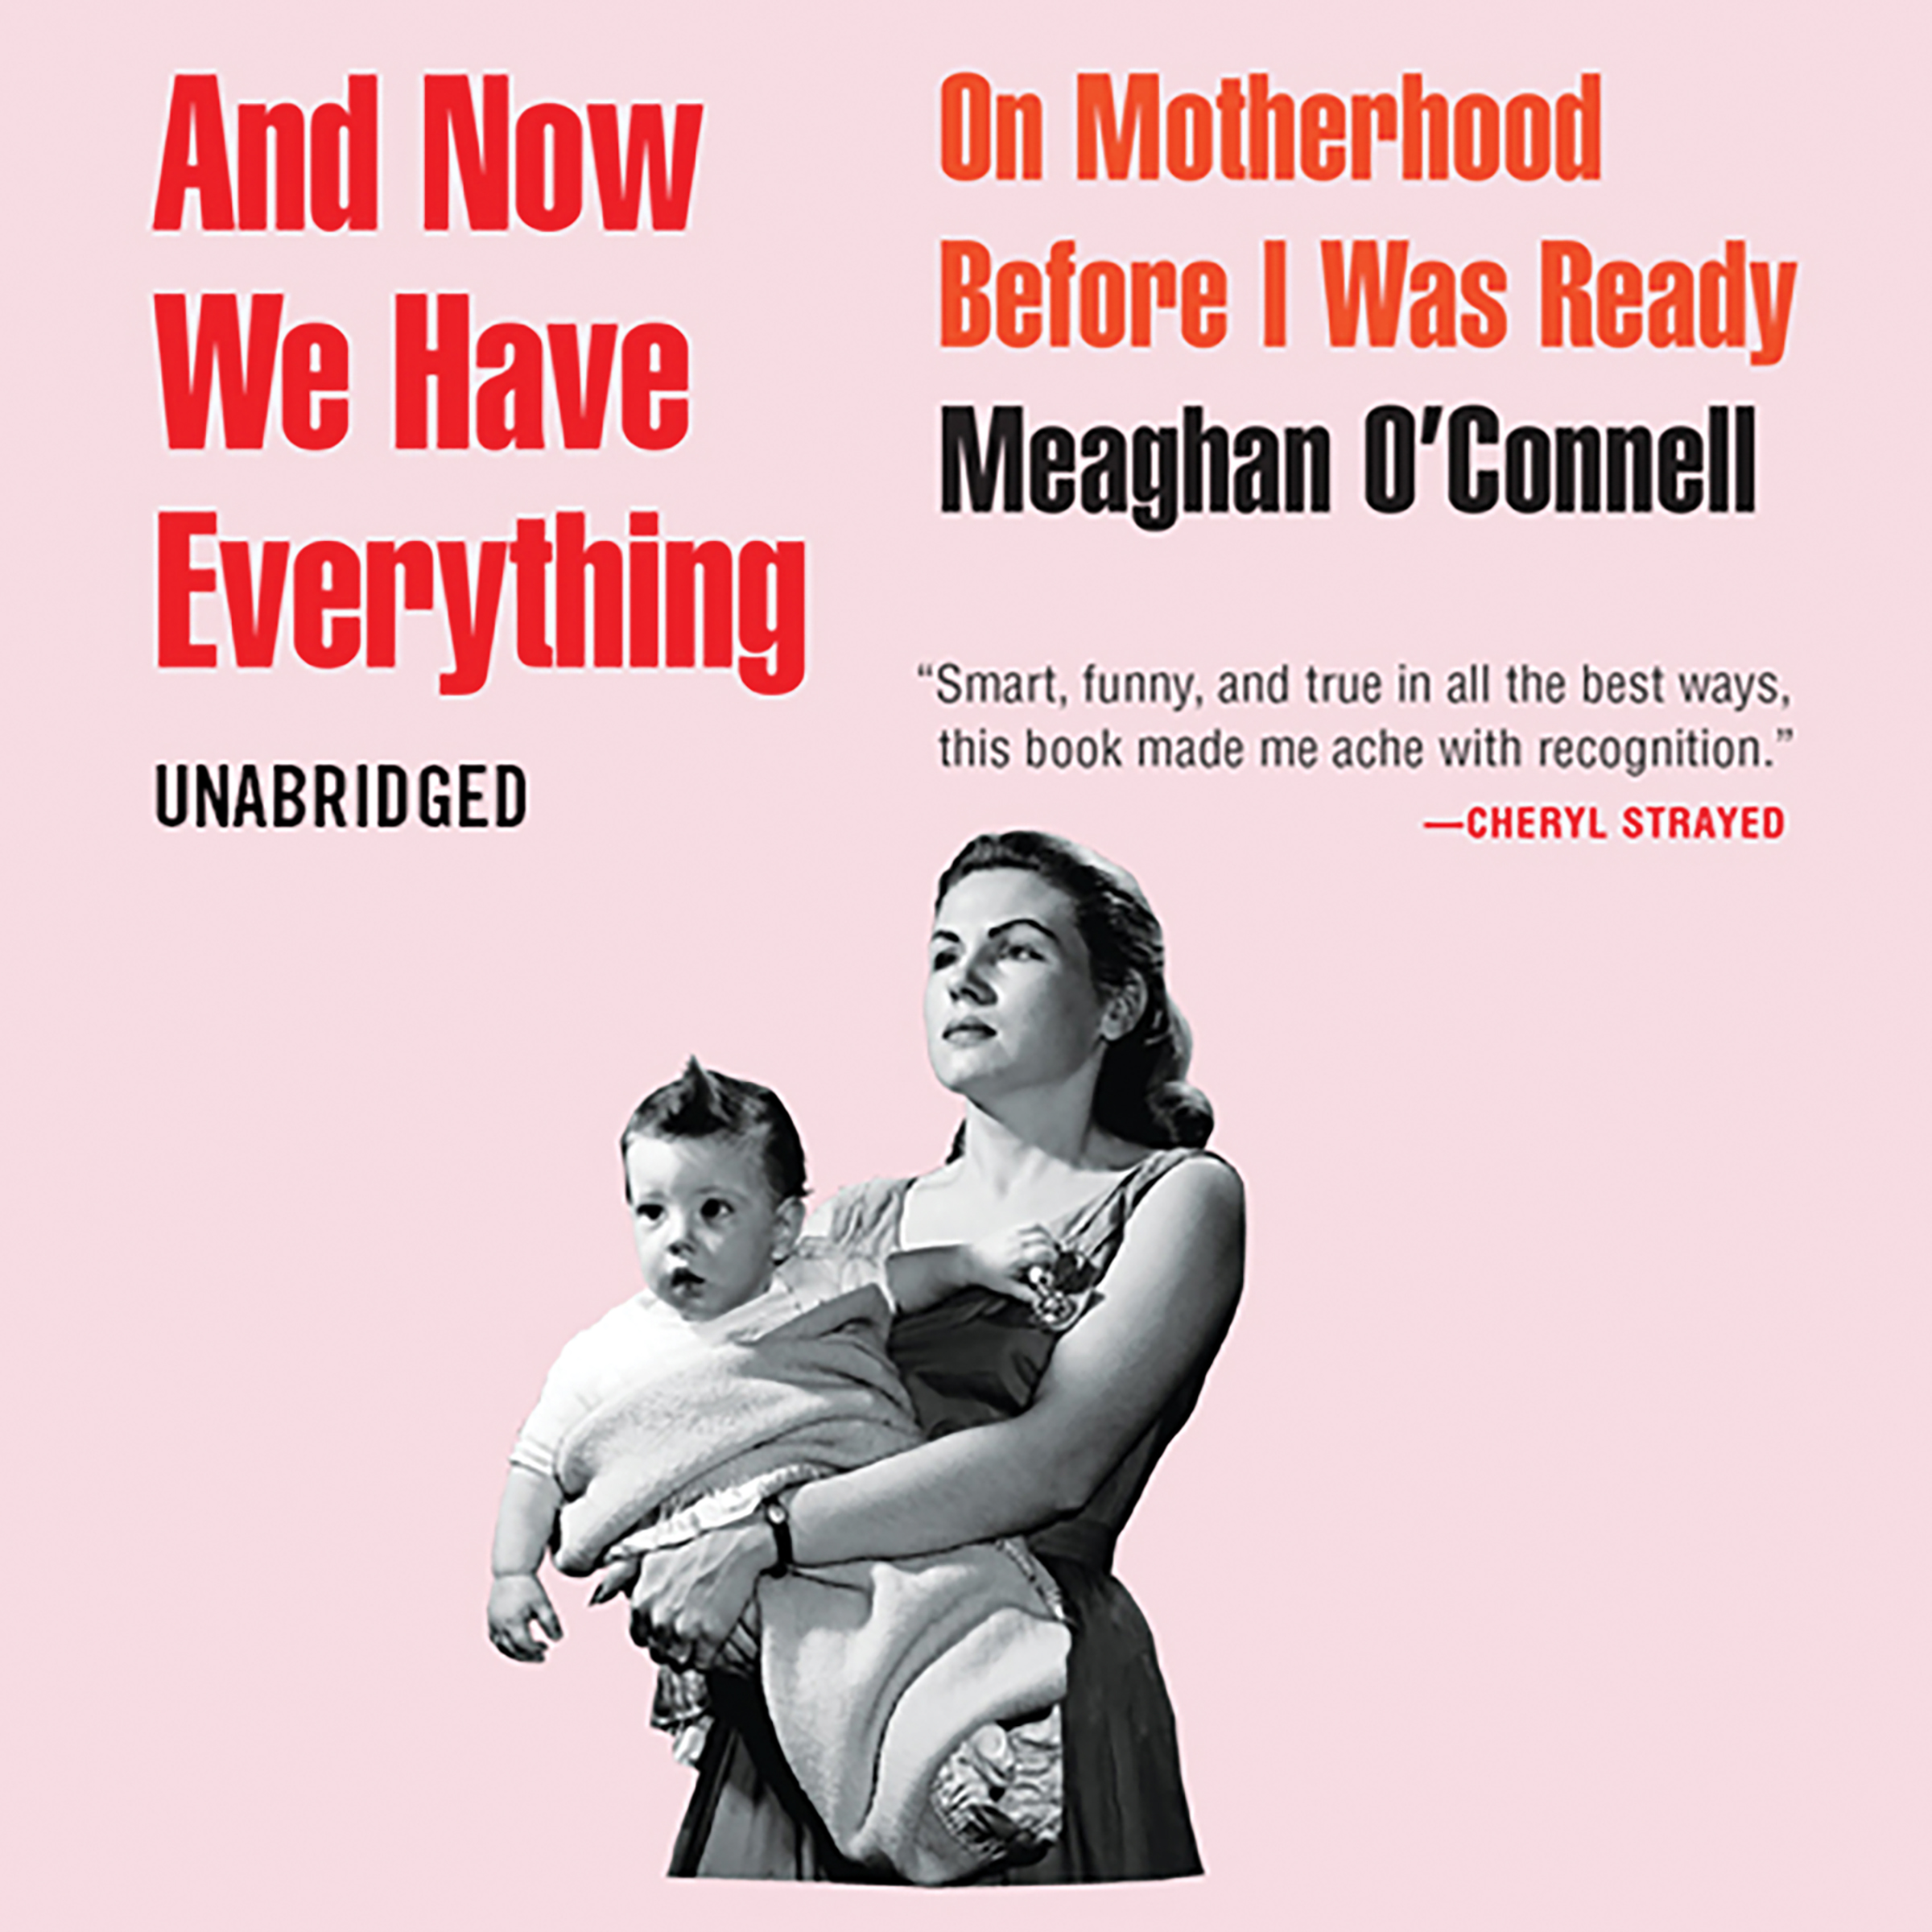 image for And Now We Have Everything: On Motherhood Before I Was Ready